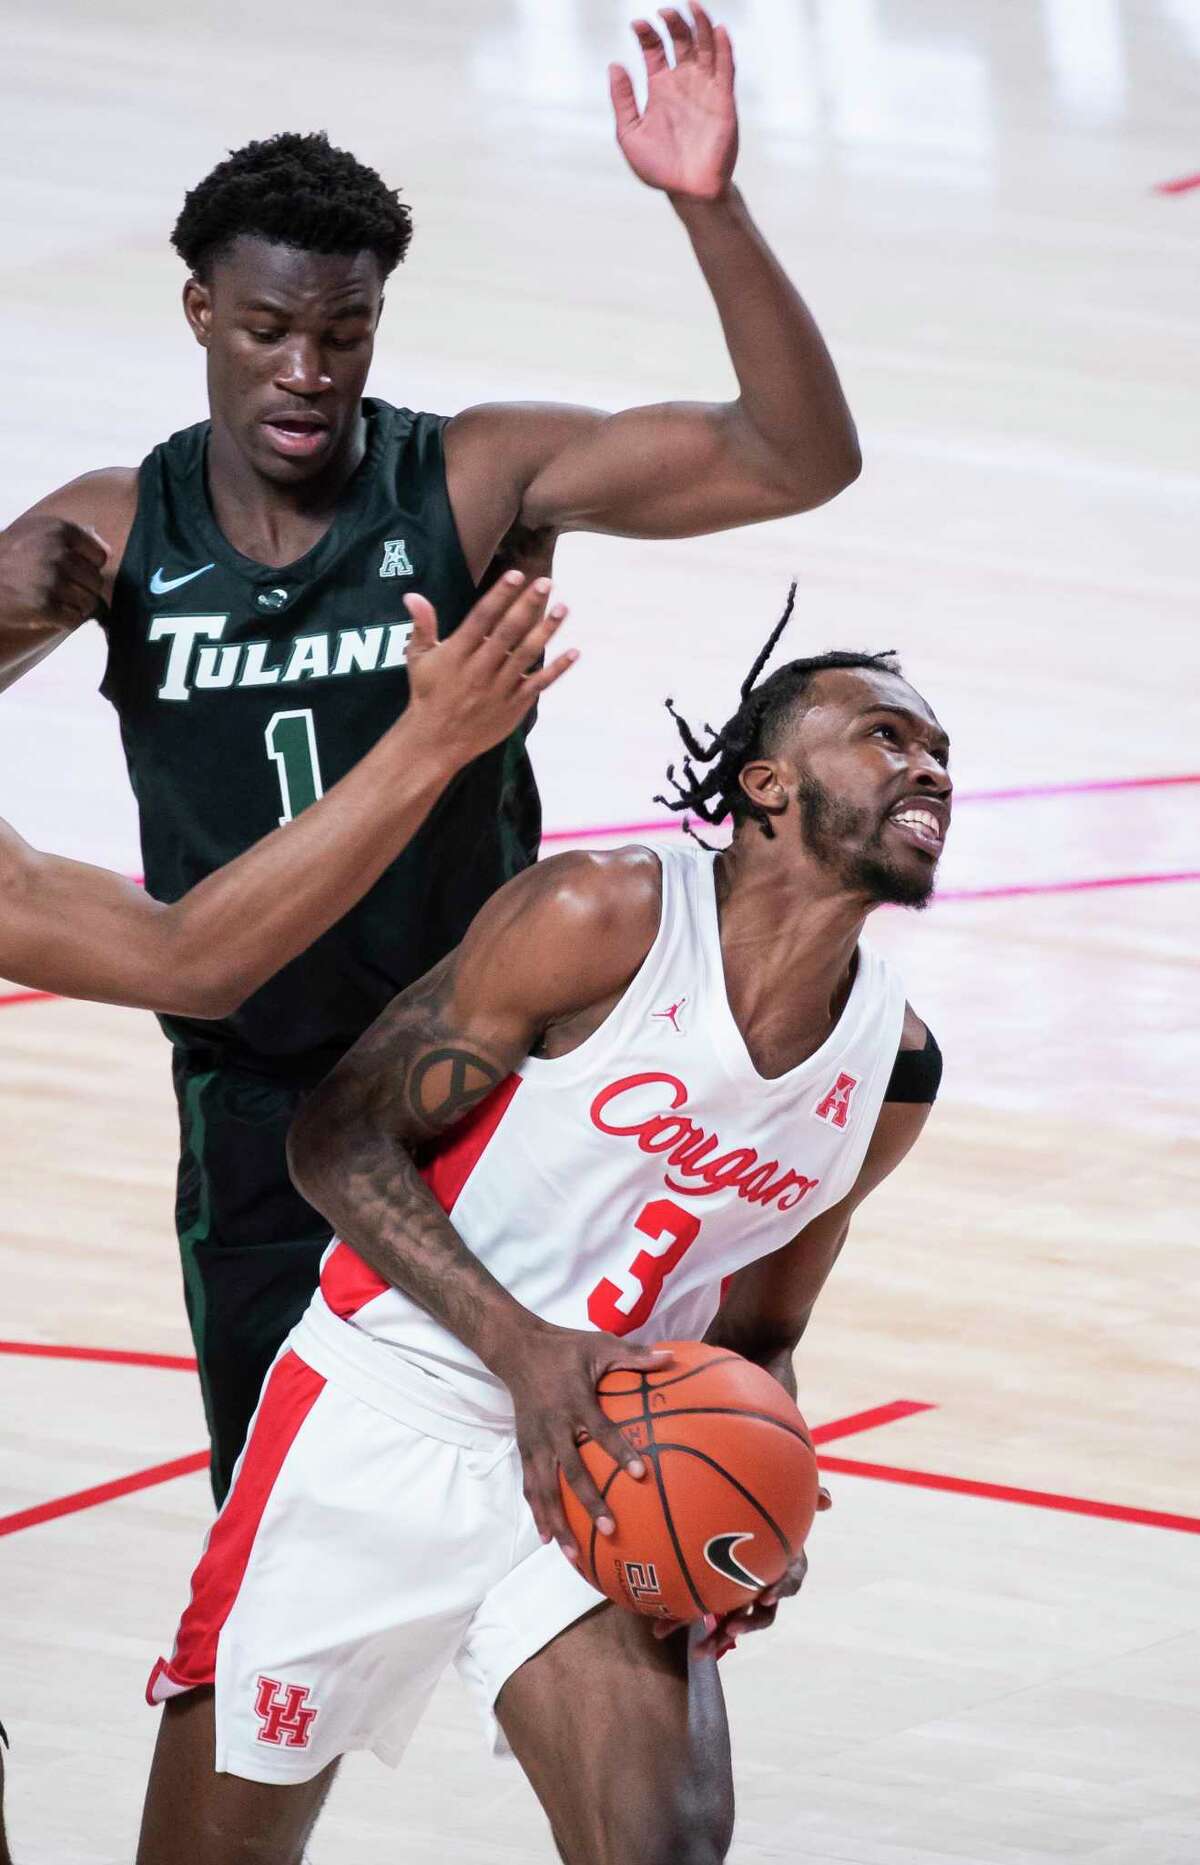 Houston Cougars guard DeJon Jarreau (3) drives past Tulane Green Wave guard Sion James (1) during the first half of a game between the University of Houston Cougars and the Tulane University Green Wave on Saturday, Jan. 9, 2021, at the Fertitta Center in Houston.